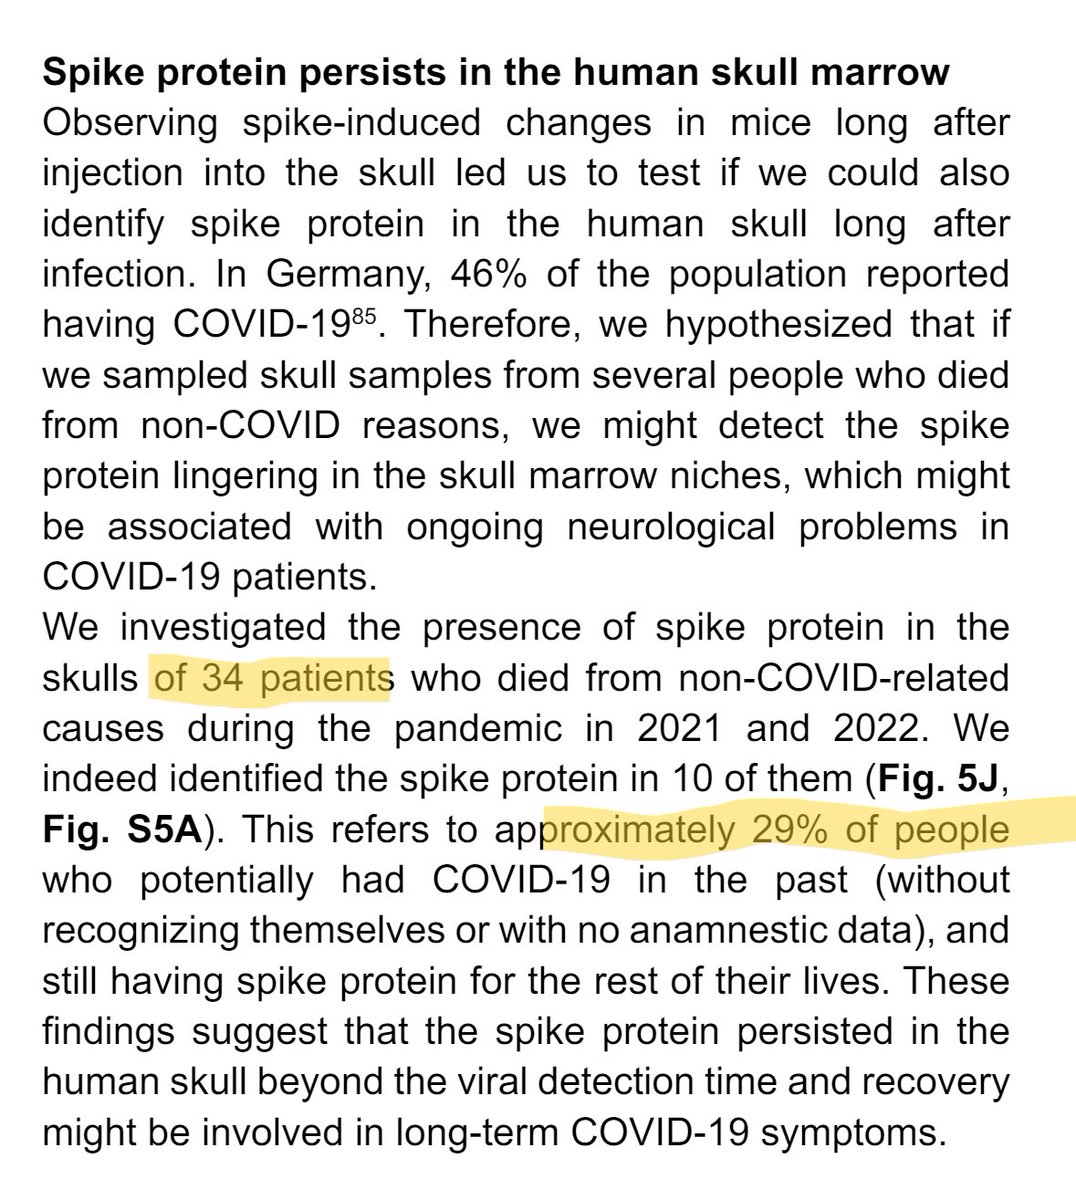 Autopsy was performed on average 5 days later. RNA degrades fast, but they still found spike RNA in their skull marrow in 10 out of 34. These people donated their bodies to science. They didn't die of Covid, but had confirmed Covid infections between 2021-2022. #ViralPersistence